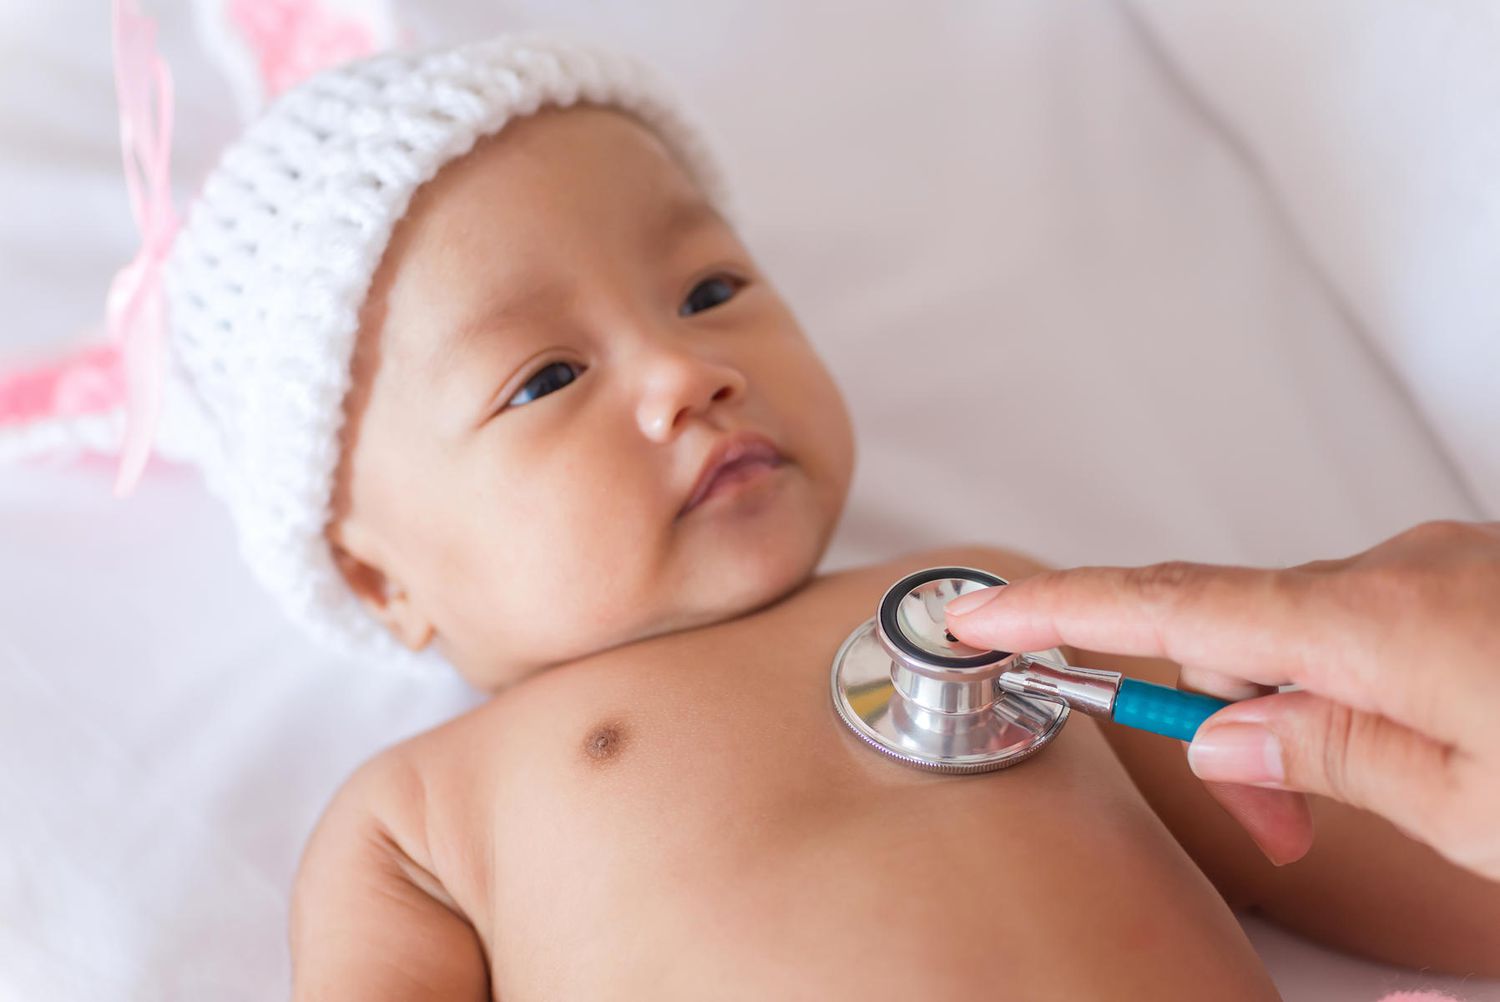 Baby with stethoscope over heart